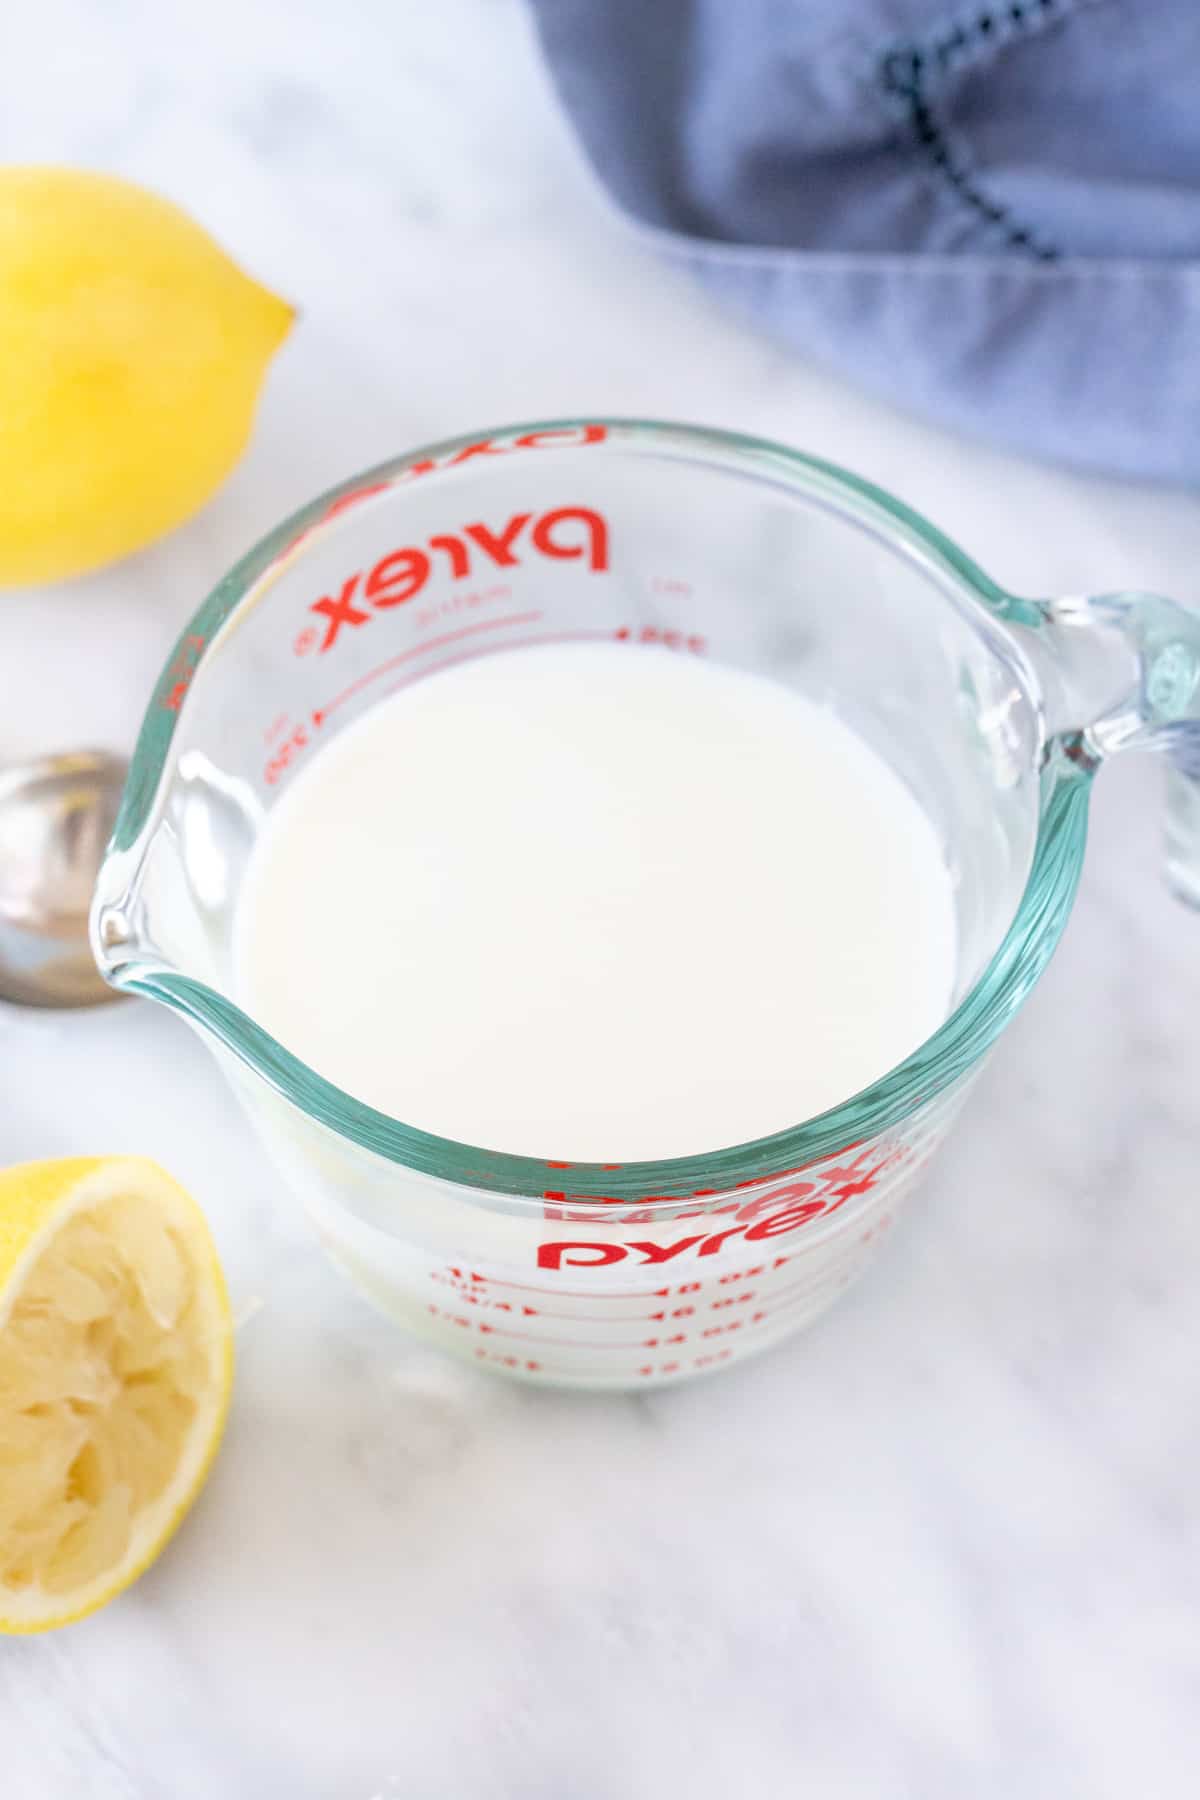 Homemade buttermilk, made with lemon juice and milk